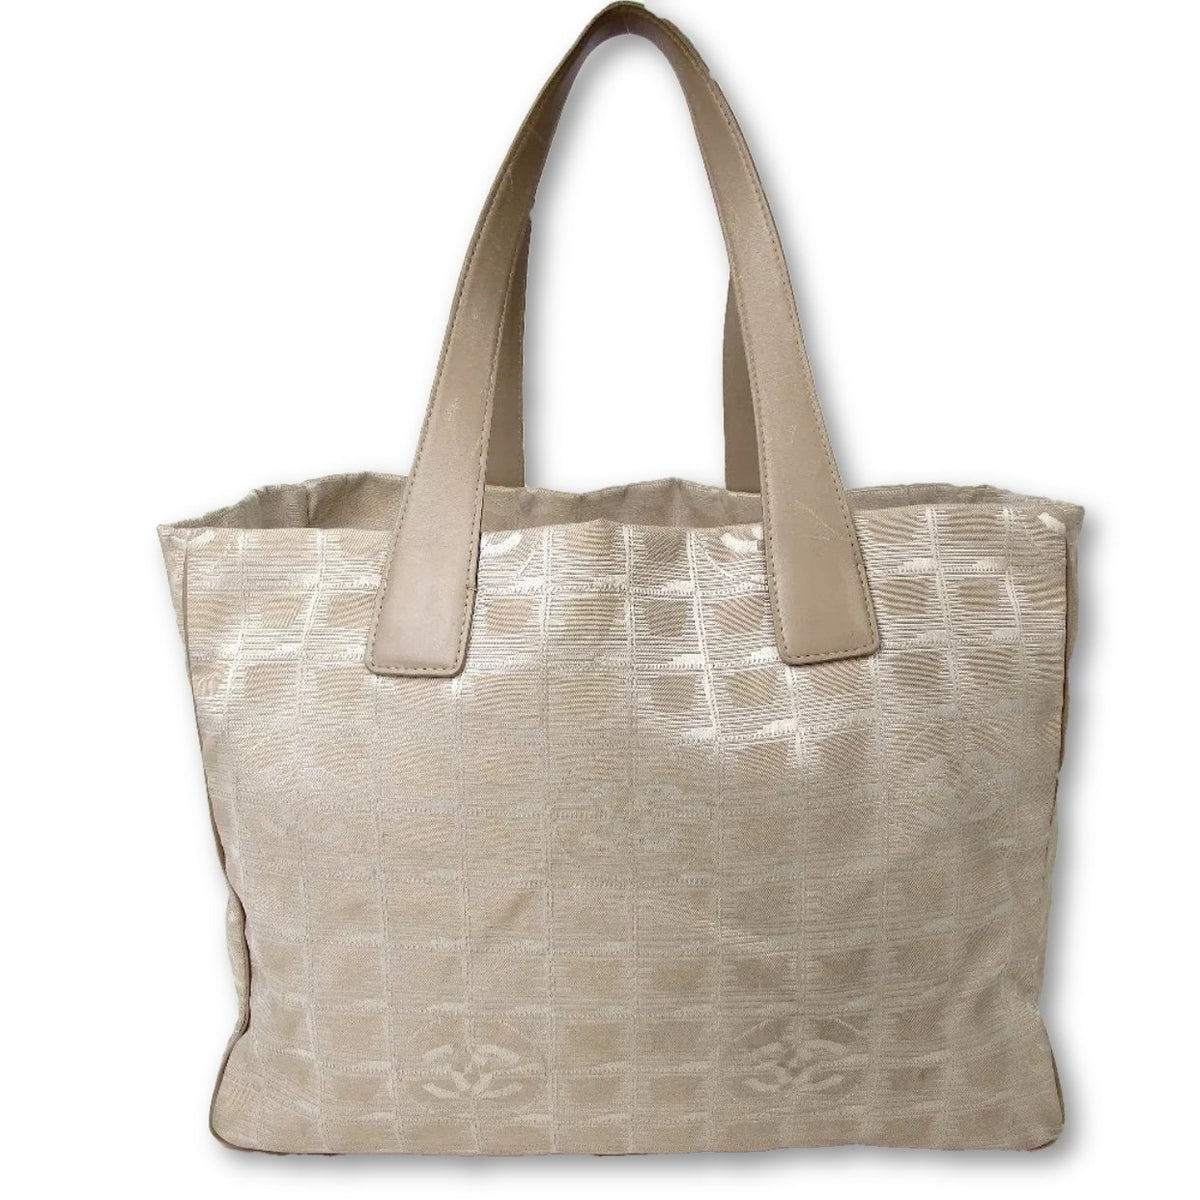 Chanel Large CC Travel Tote: Beige and Creme